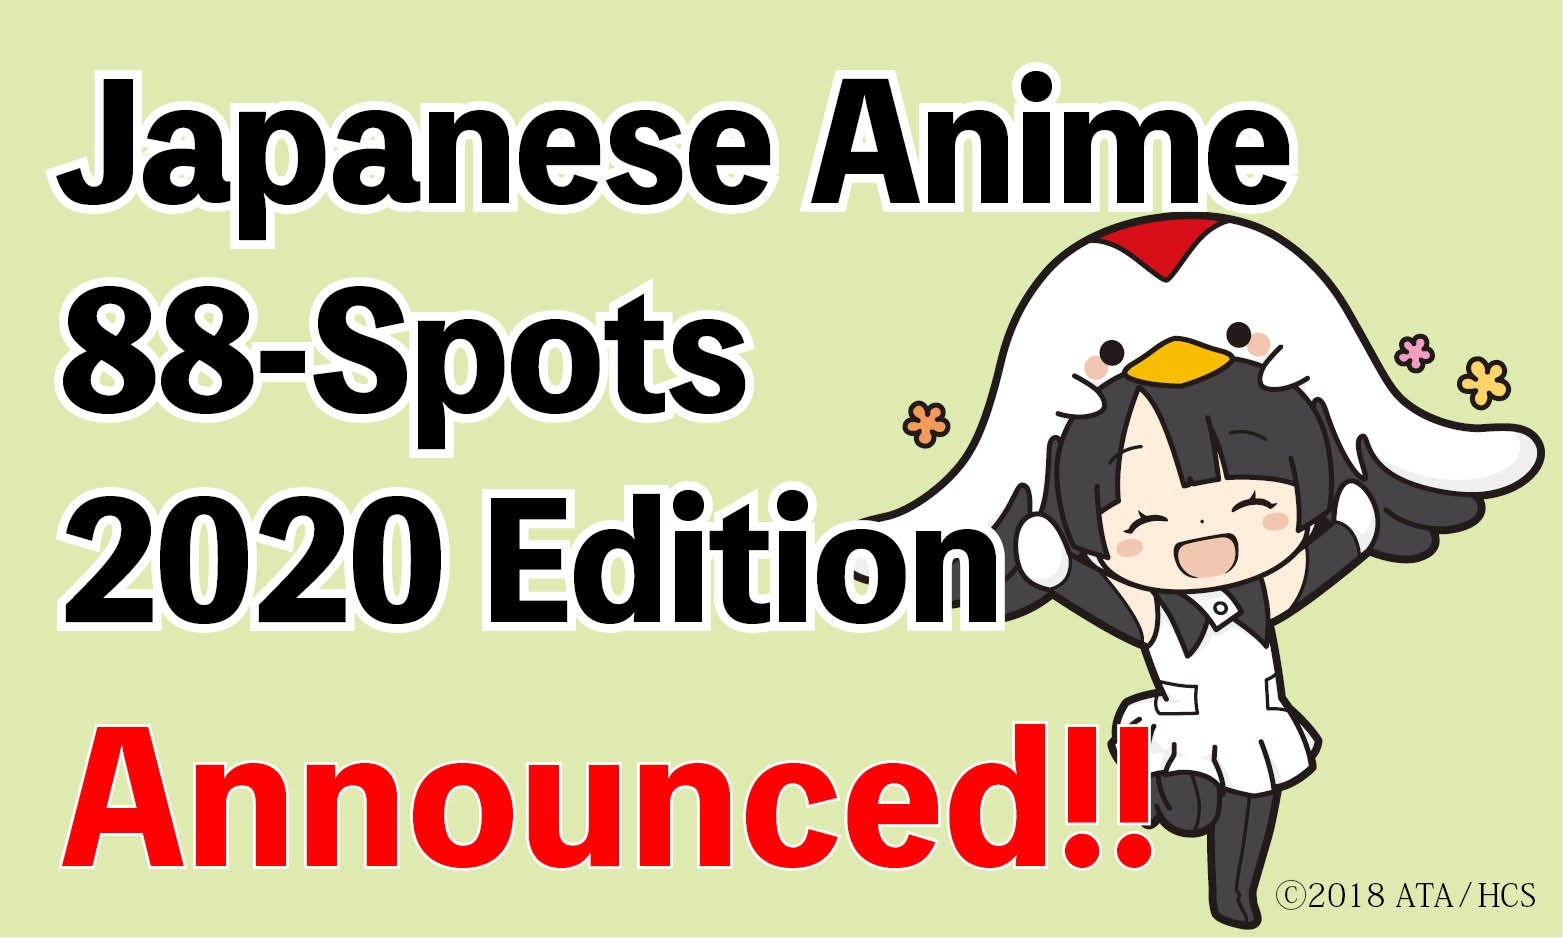 Image for 2020 edition of “Japanese Anime 88-Spots” announced!